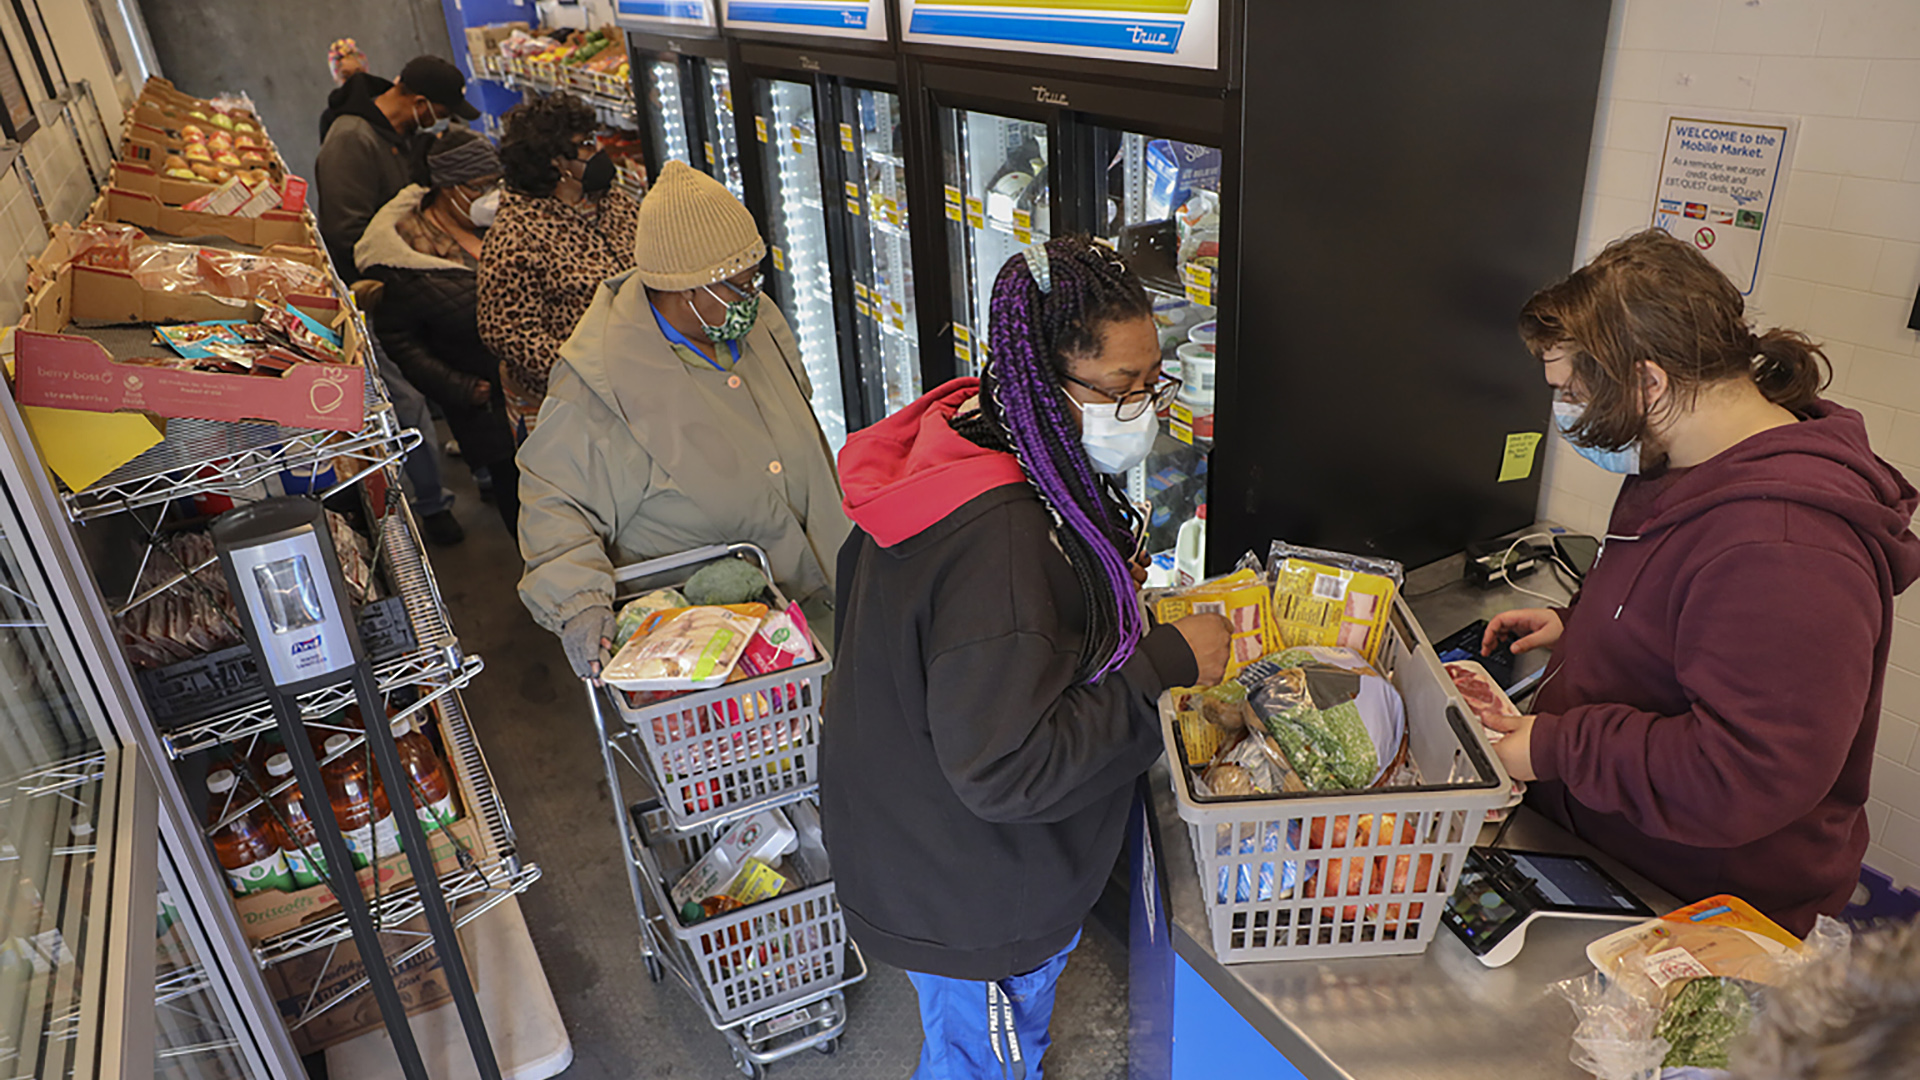 Shoppers with carts and baskets shop, select items and check out while standing in a line in a mobile food market, with shelves and coolers containing groceries on either side.